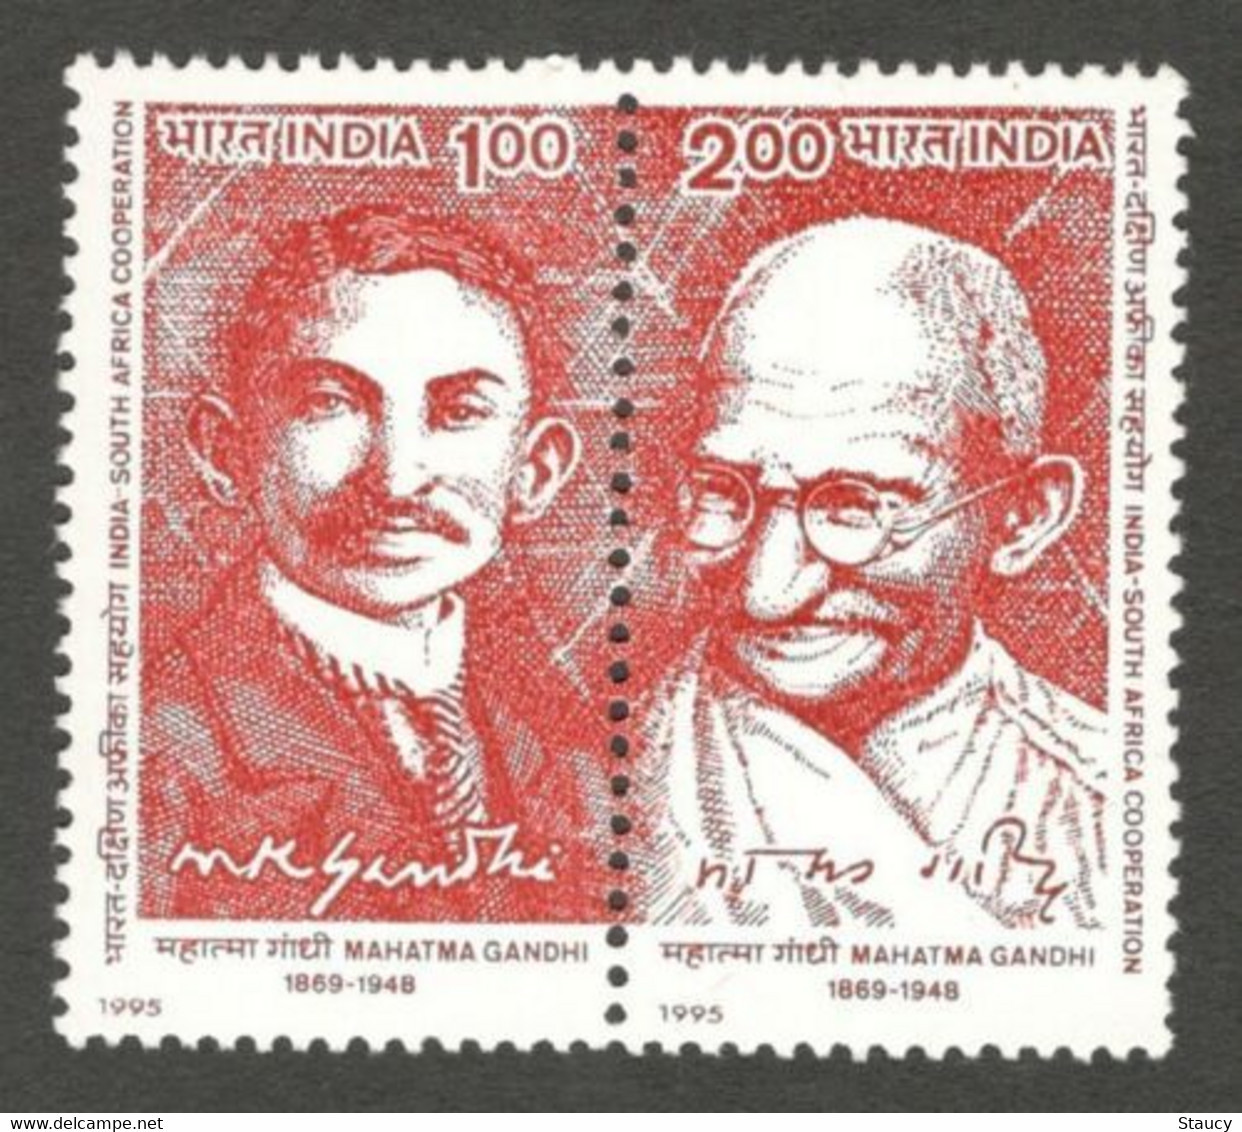 India 1995 Mahatma Gandhi Se-tenant Pair "India South Africa Joint Issue", MNH As Per Scan - Nuovi